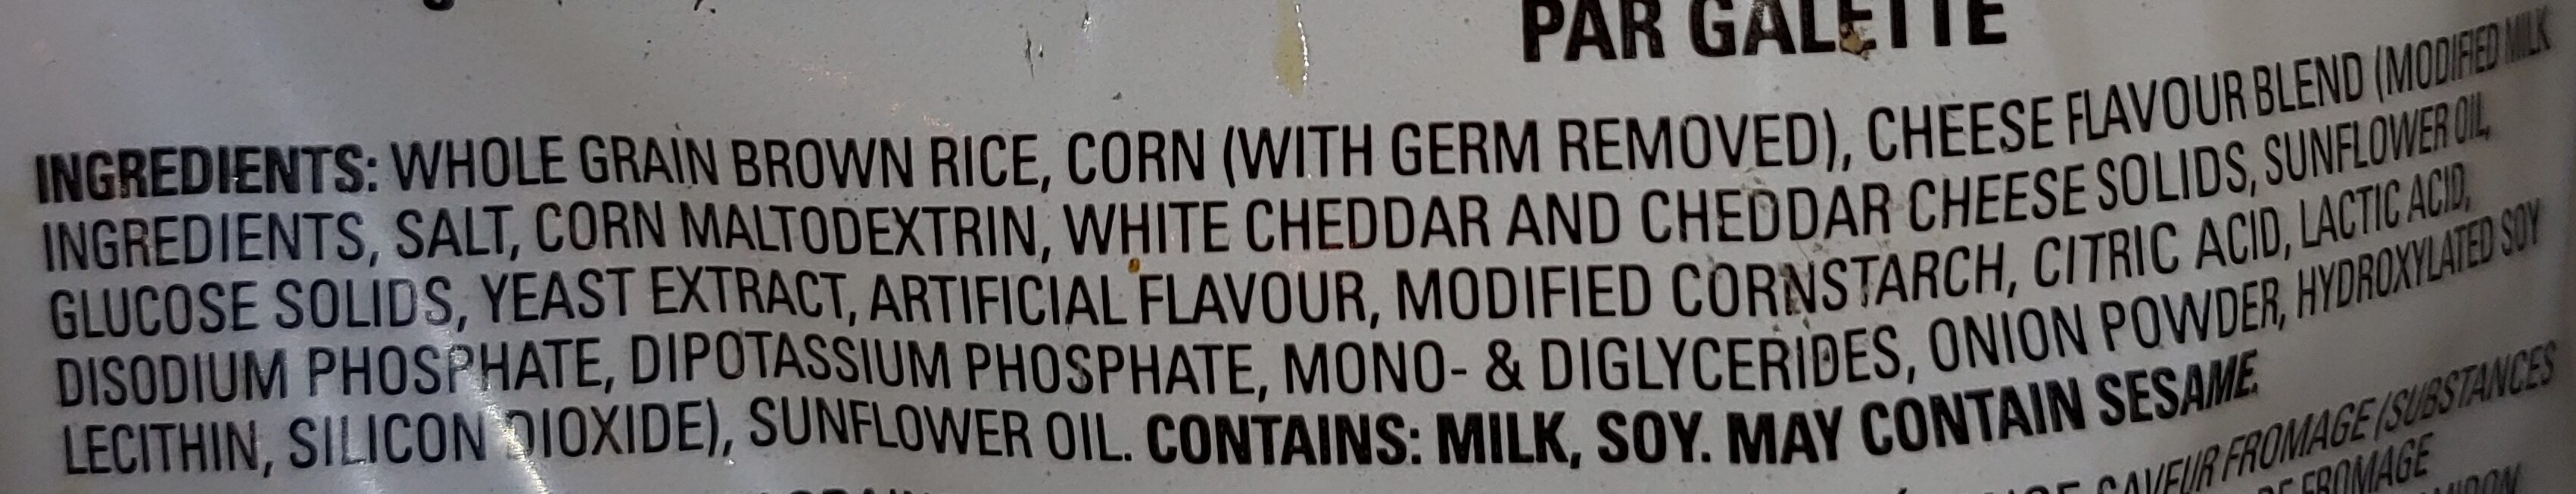 White cheddar - flavoured Rice cakes - Ingredients